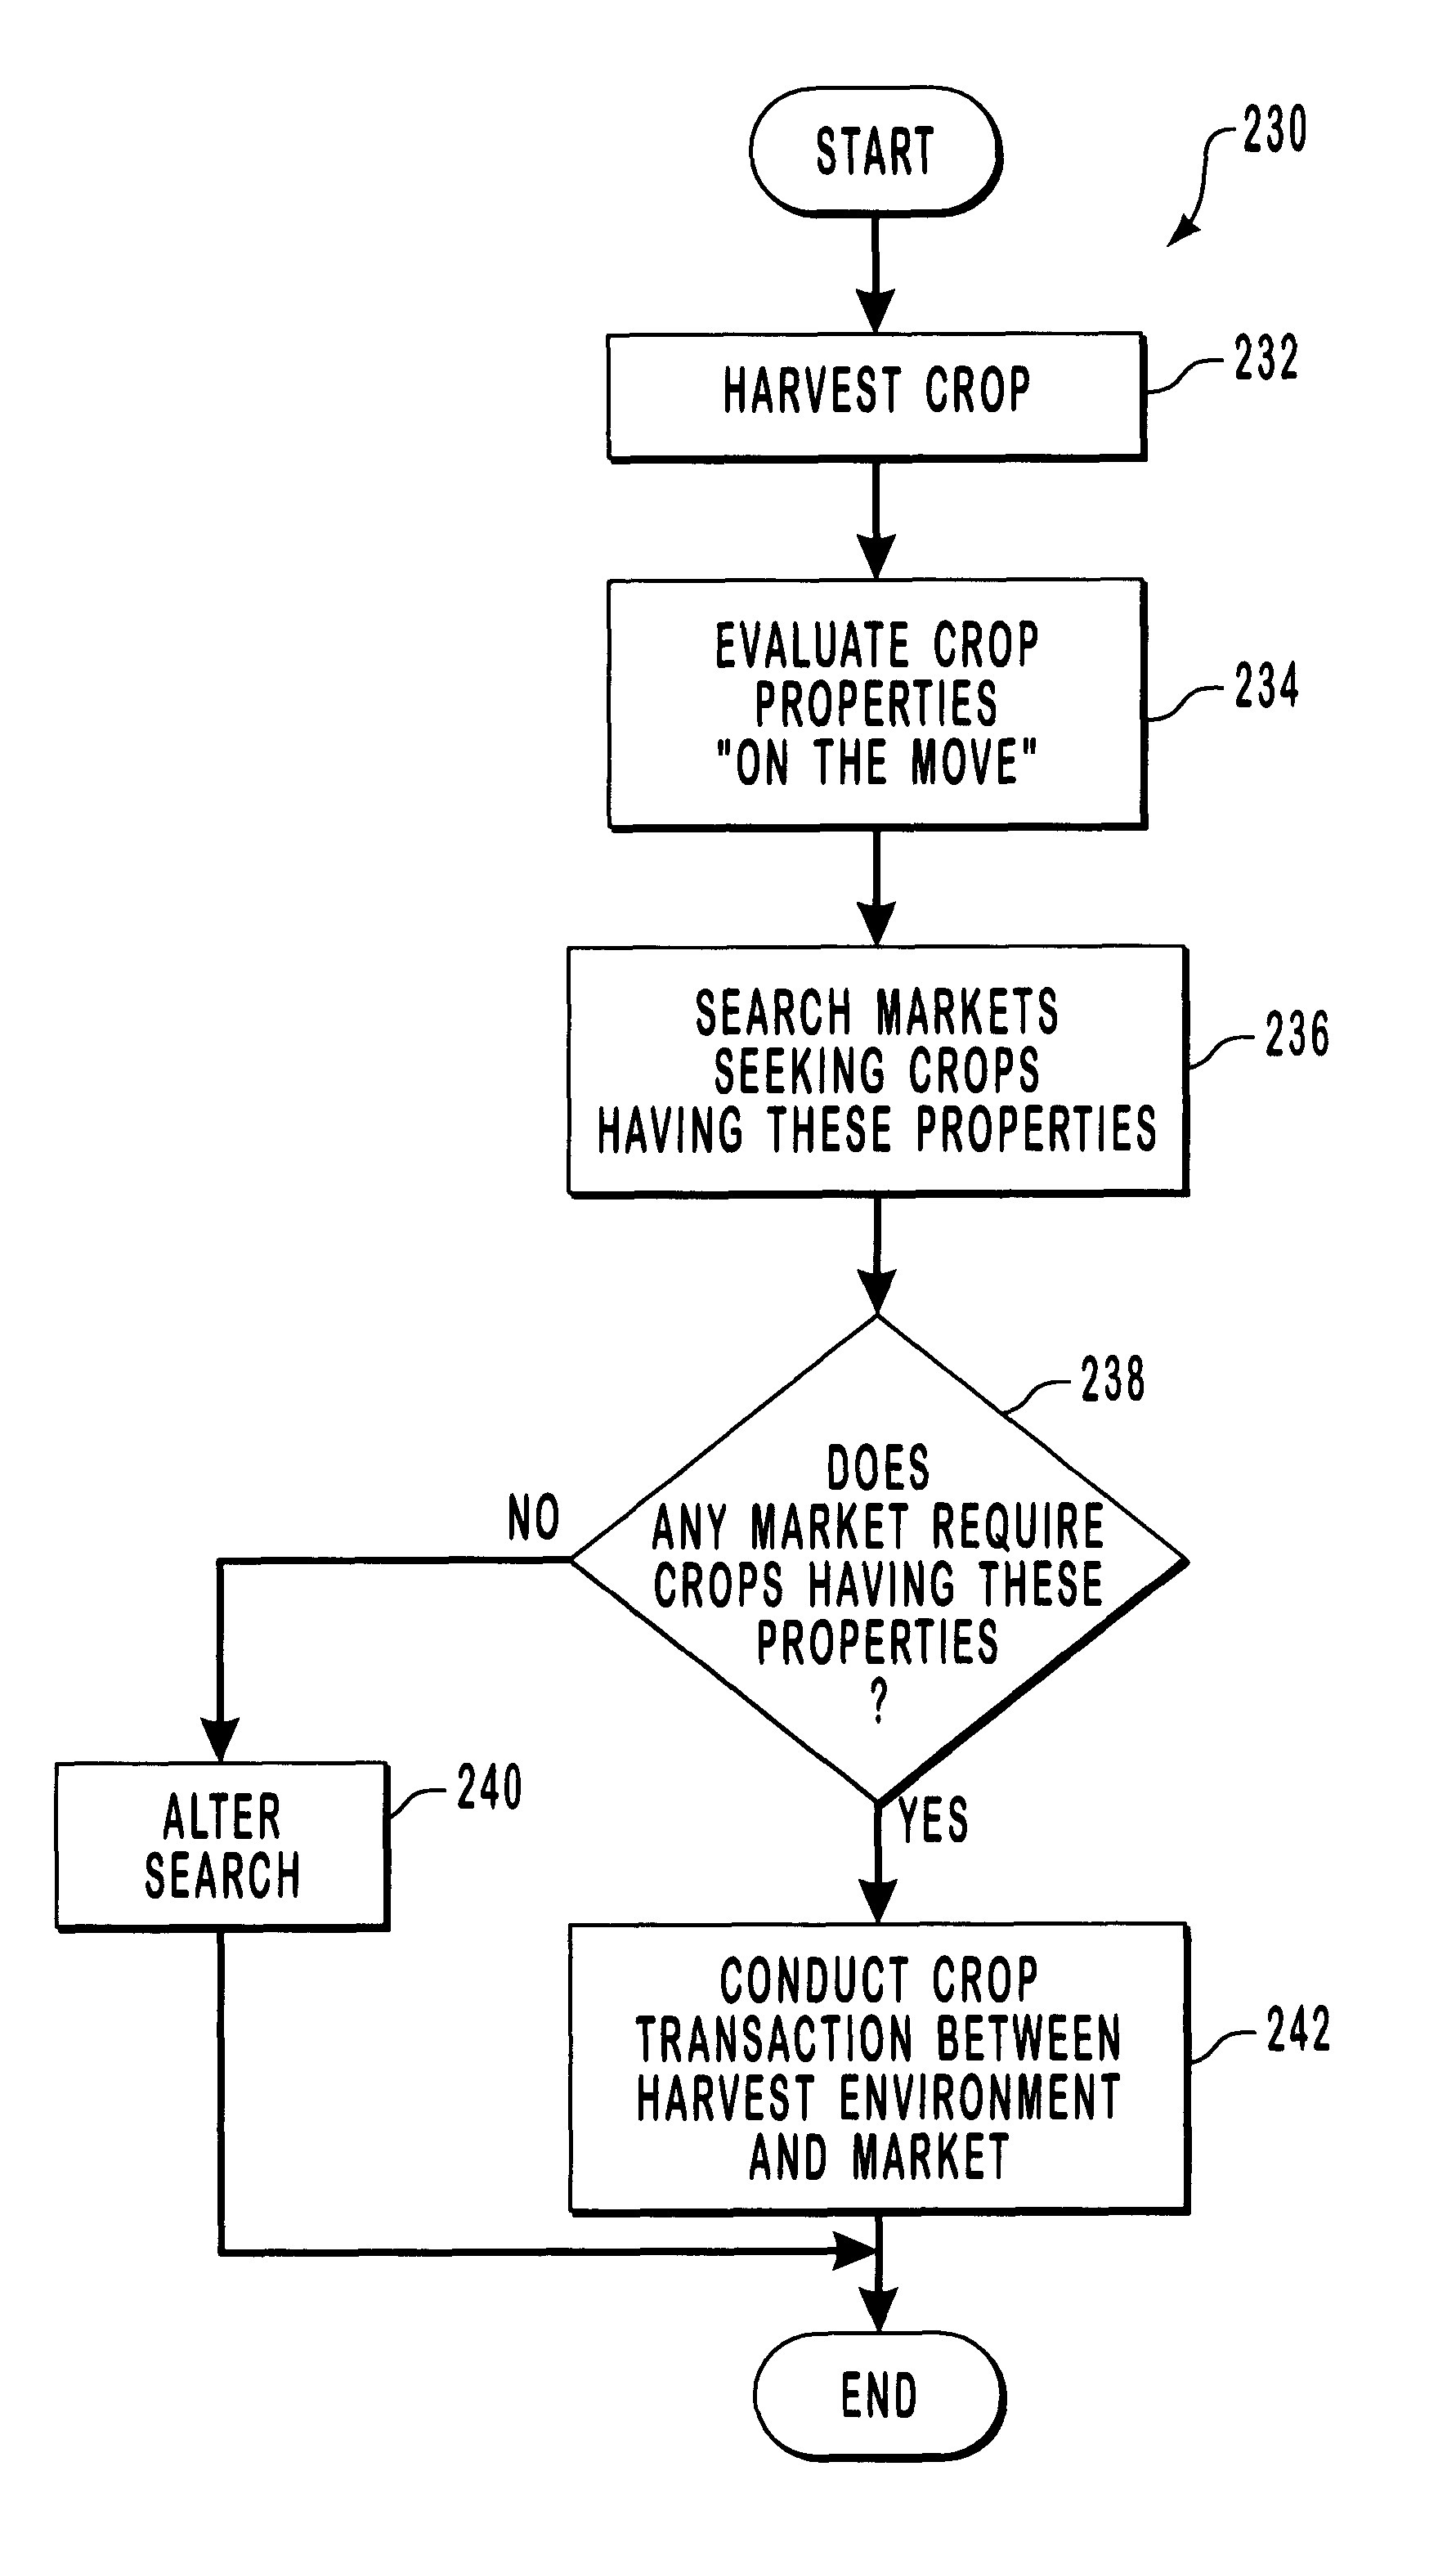 System and methods for real time linkage between harvest environment and marketplace